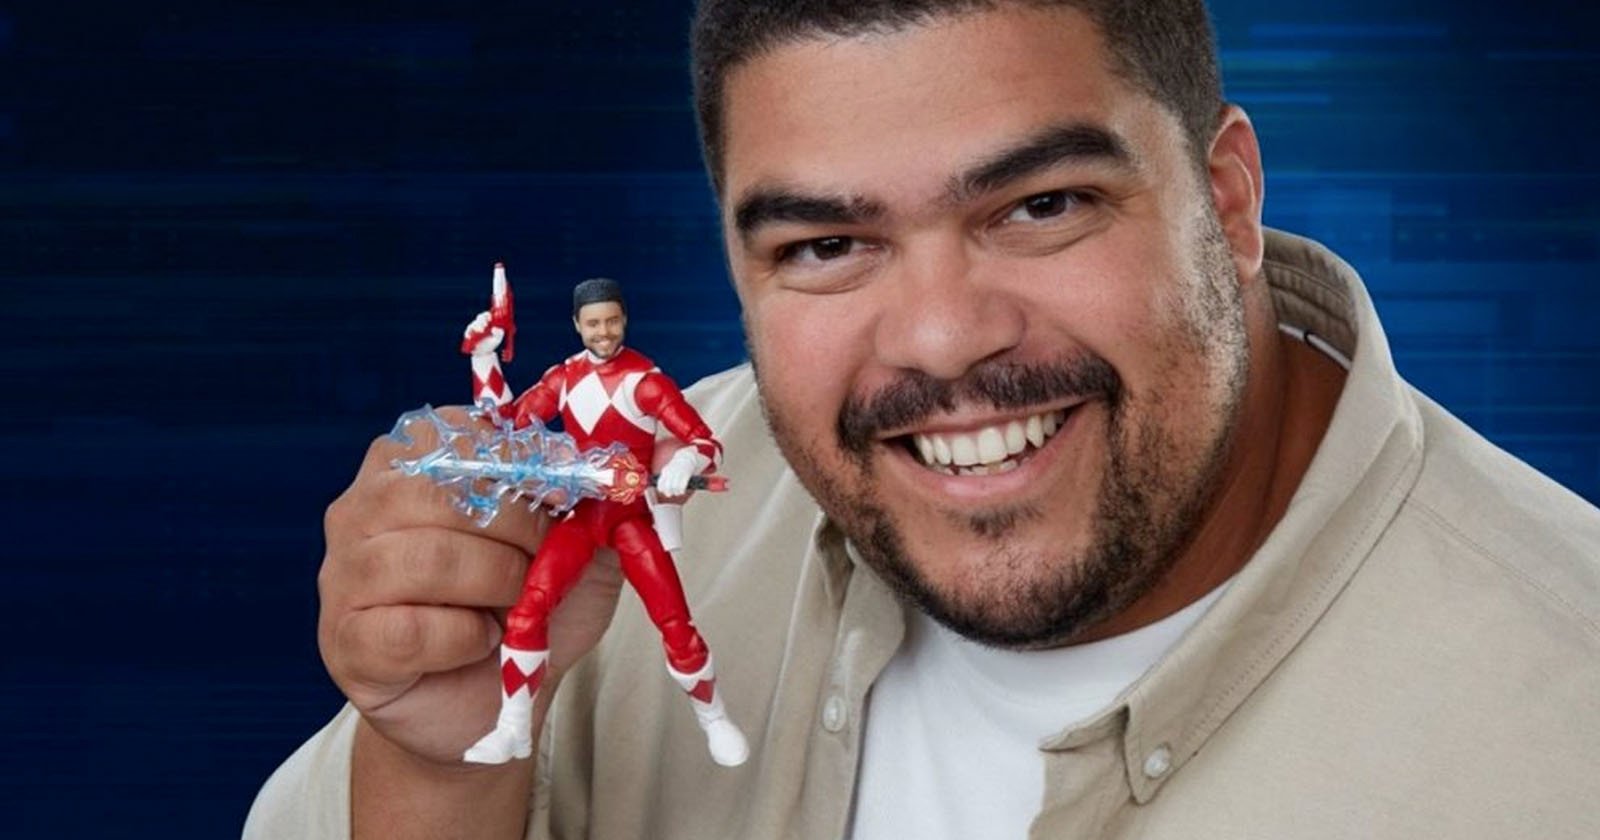  hasbro will let turn your selfie into 